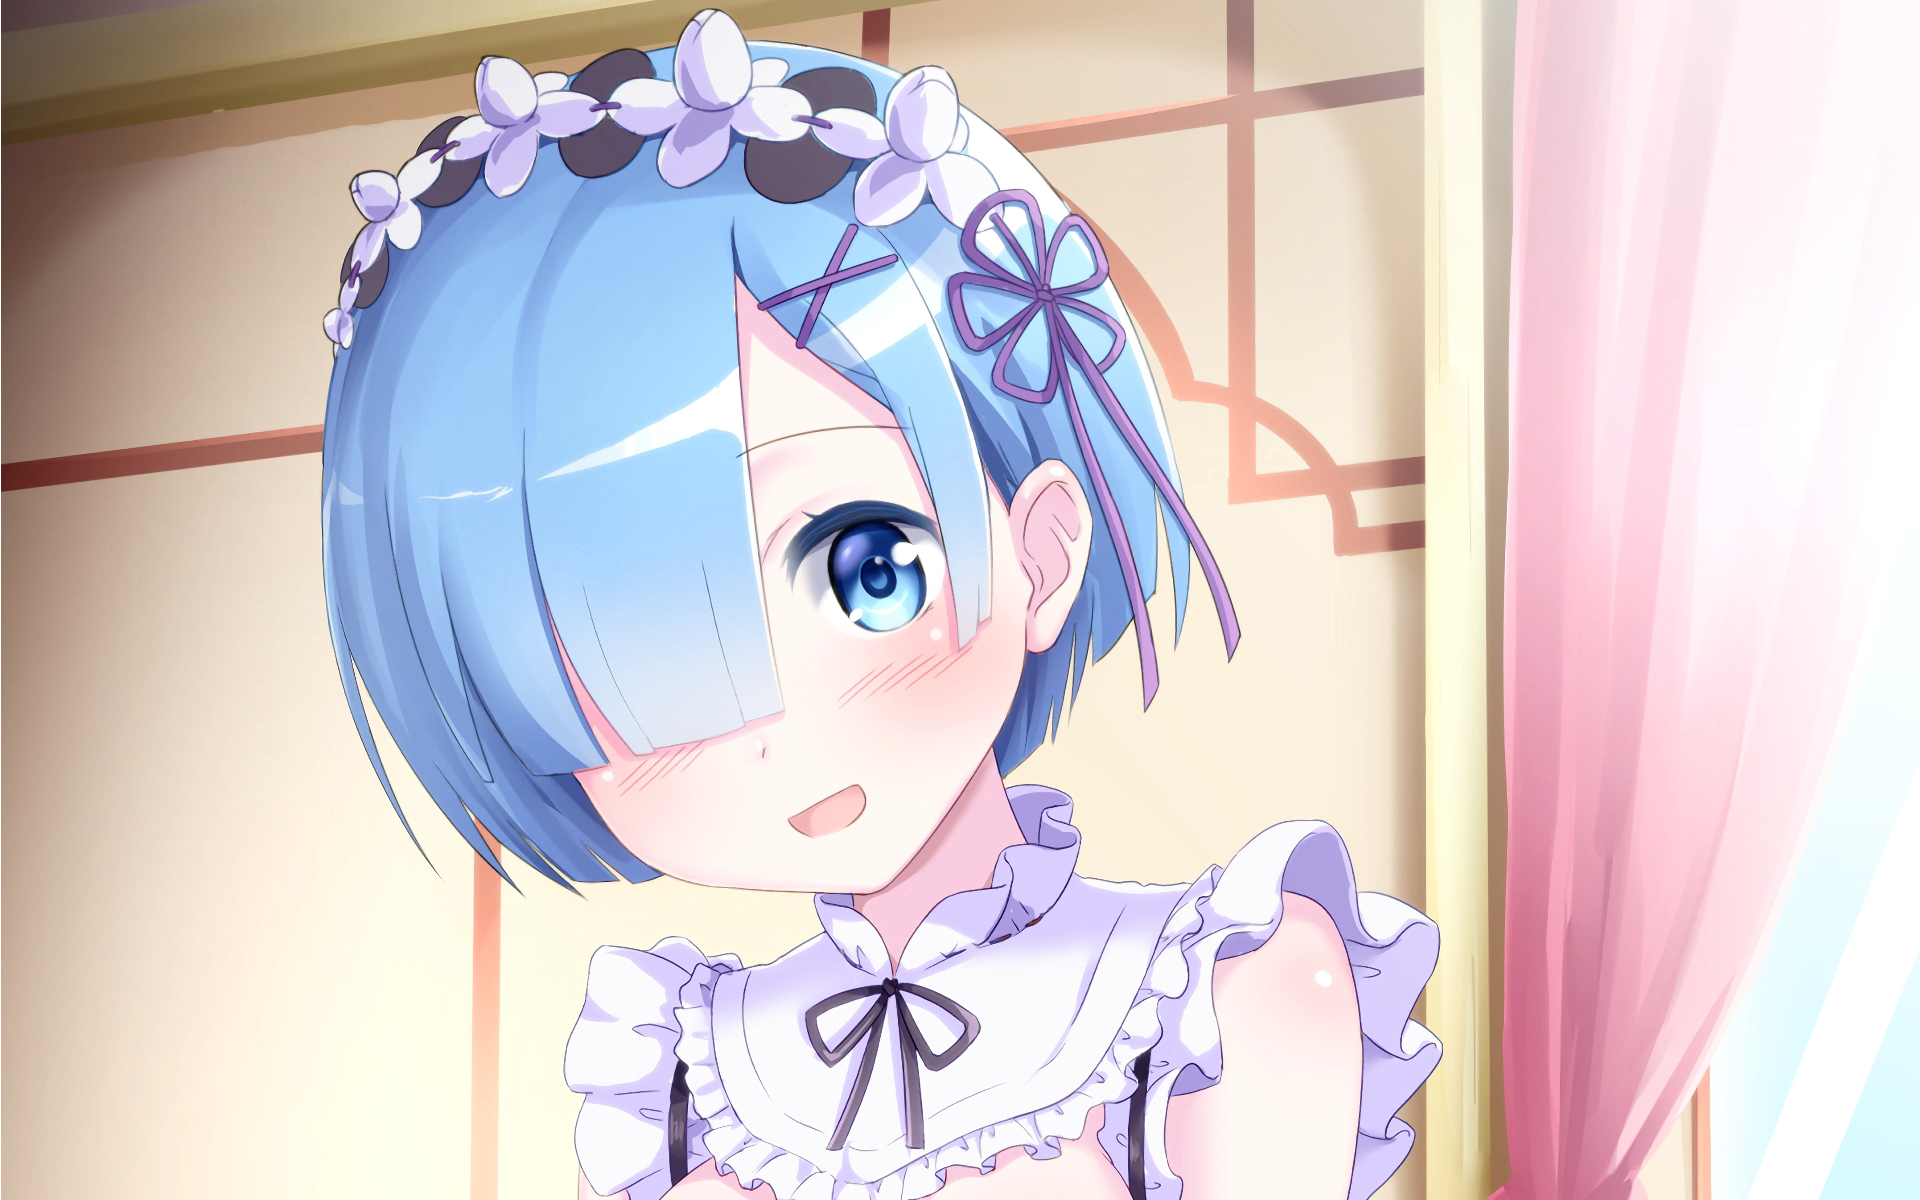 Rem a blue haired maid from the anime re:zero